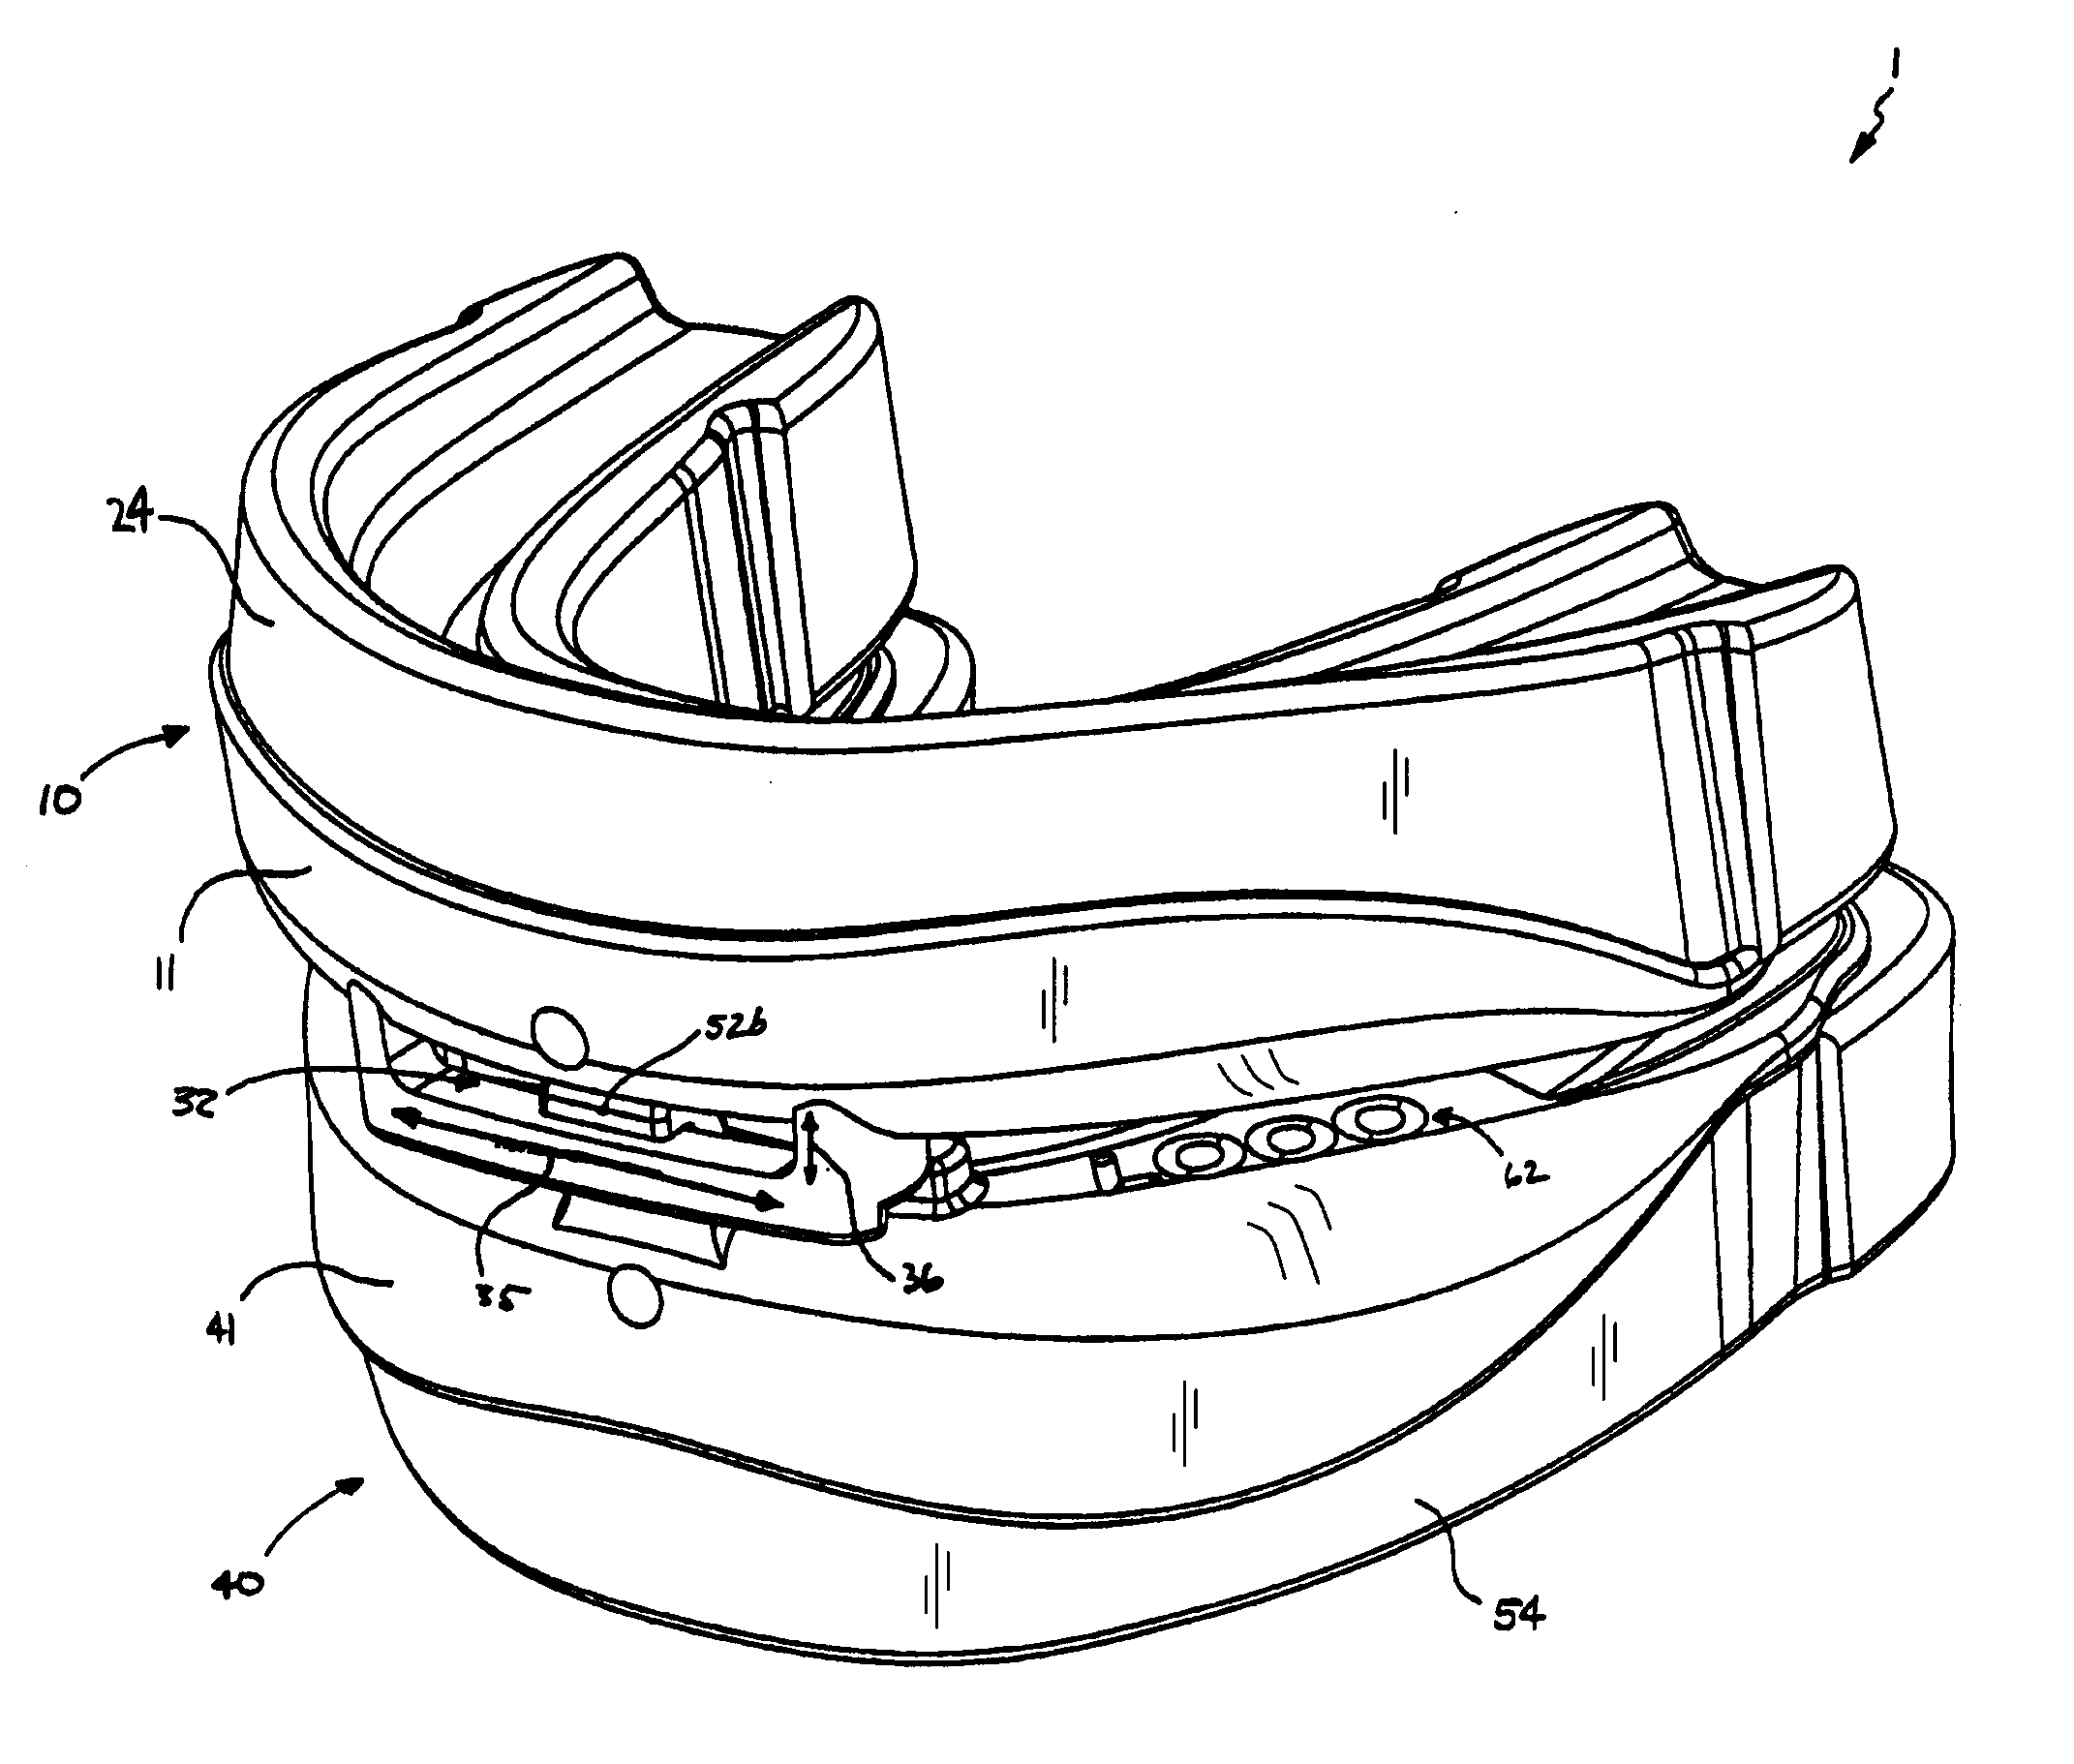 Oral appliance for treatment of snoring and sleep apnea